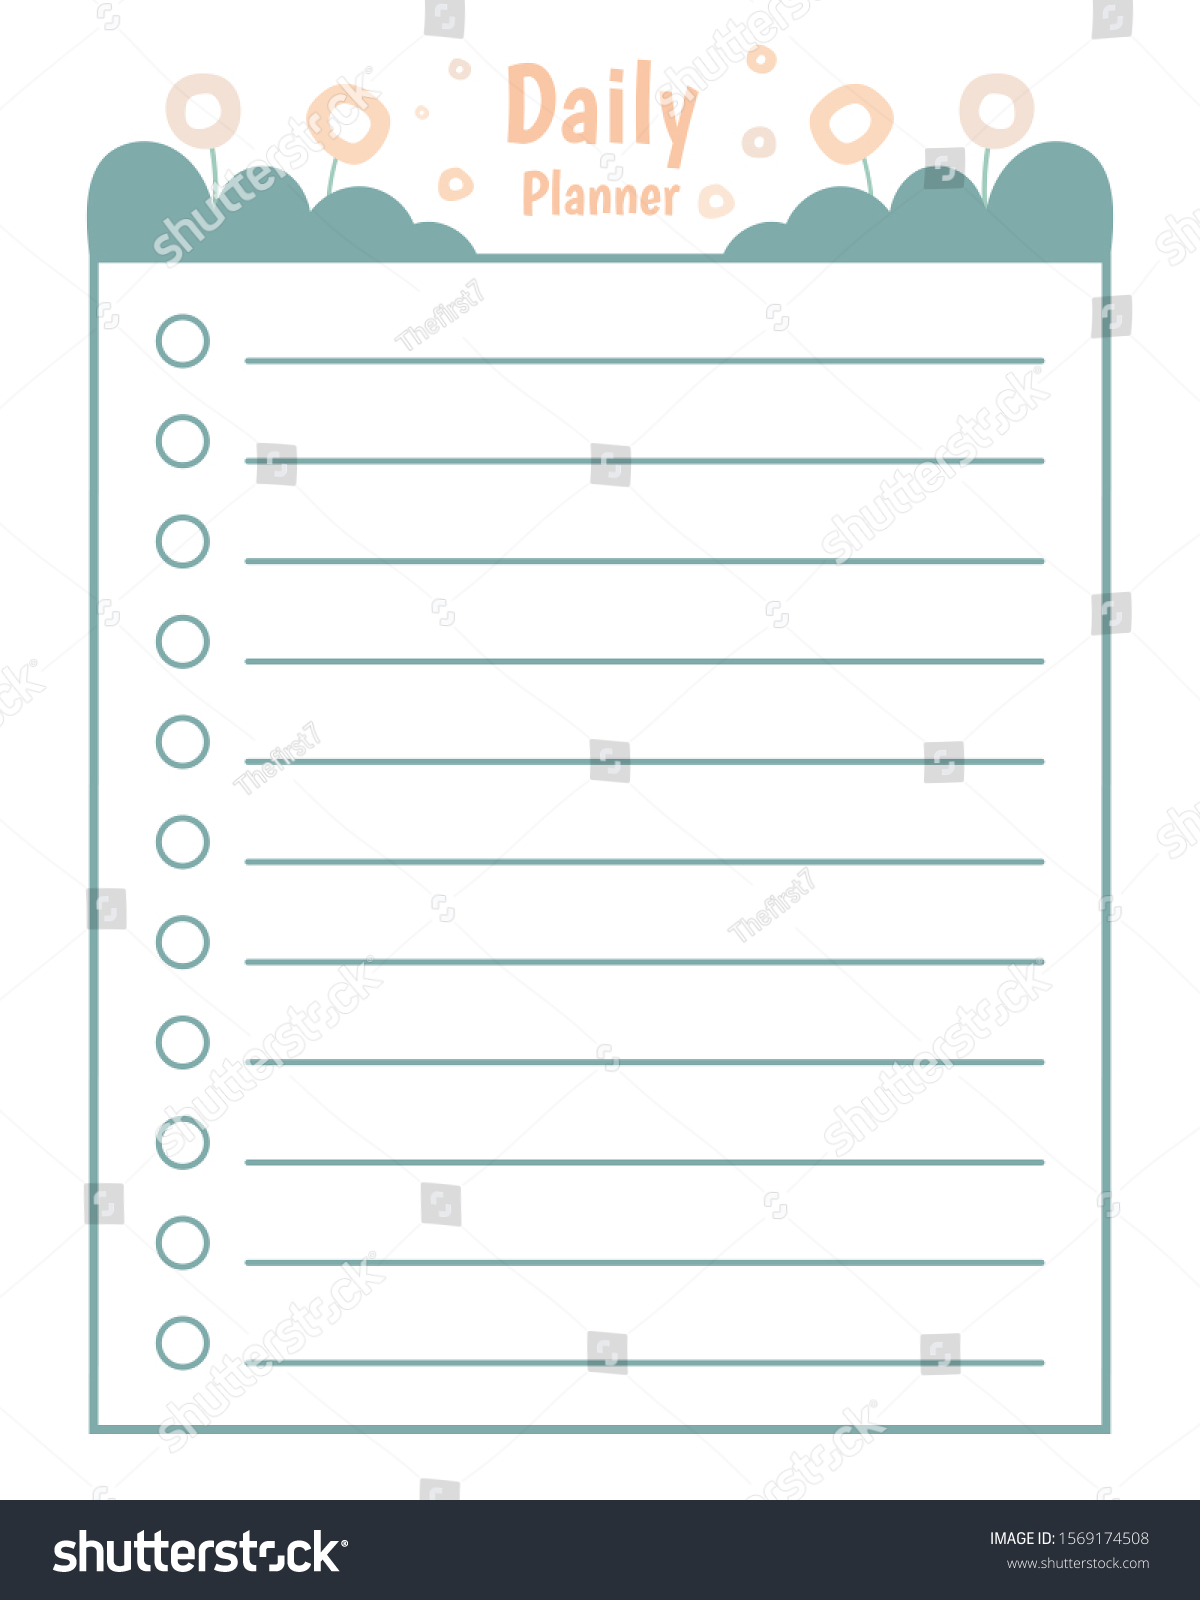 Daily Schedule Template Printable from image.shutterstock.com